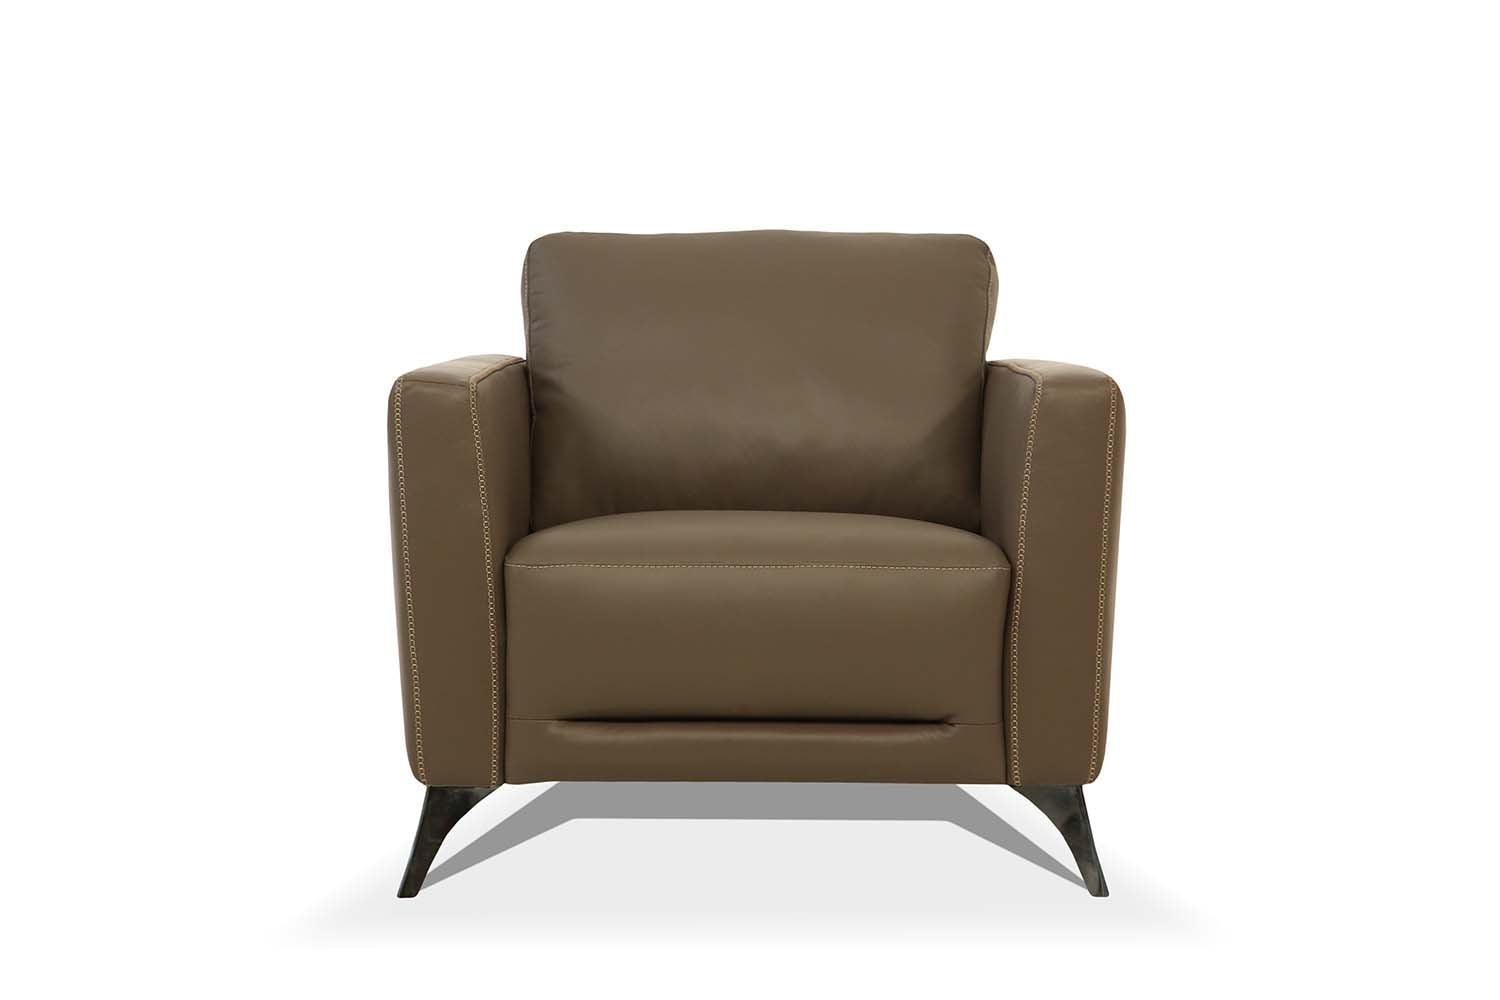 Malaga Chair Taupe Leather FredCo